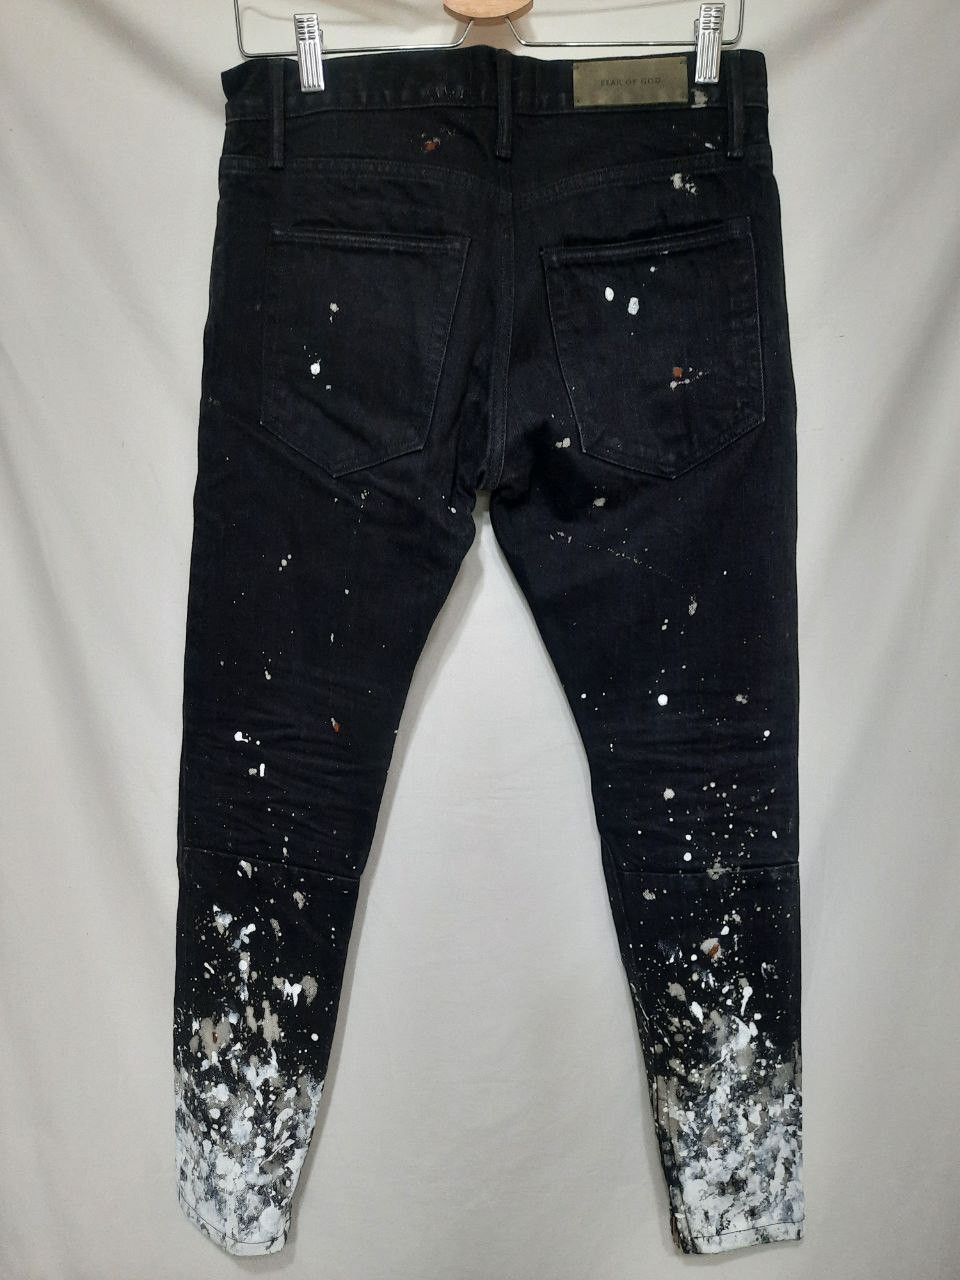 Fear of God 5th Collection Paint Splatter Jeans | Grailed